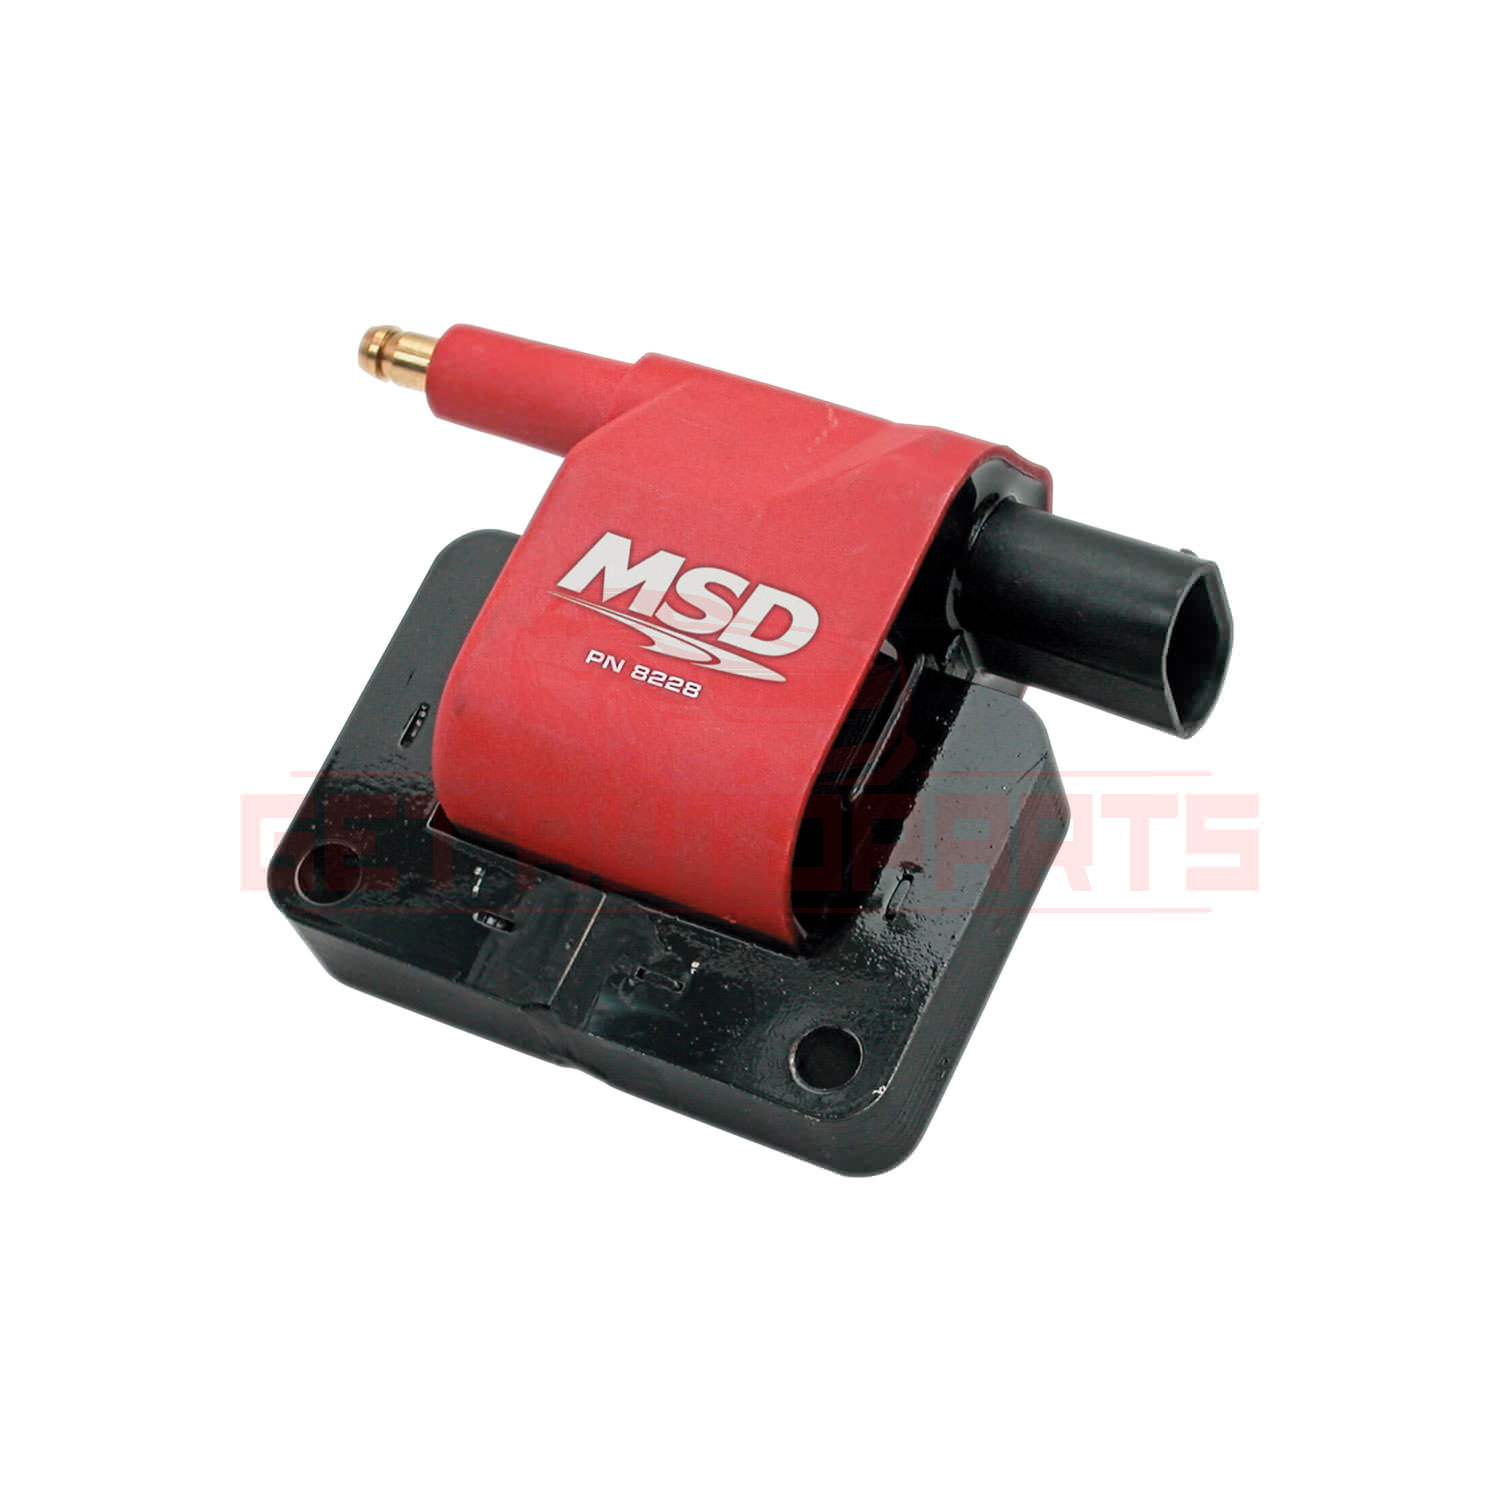 MSD Ignition Coil for Chevrolet Cavalier 1996